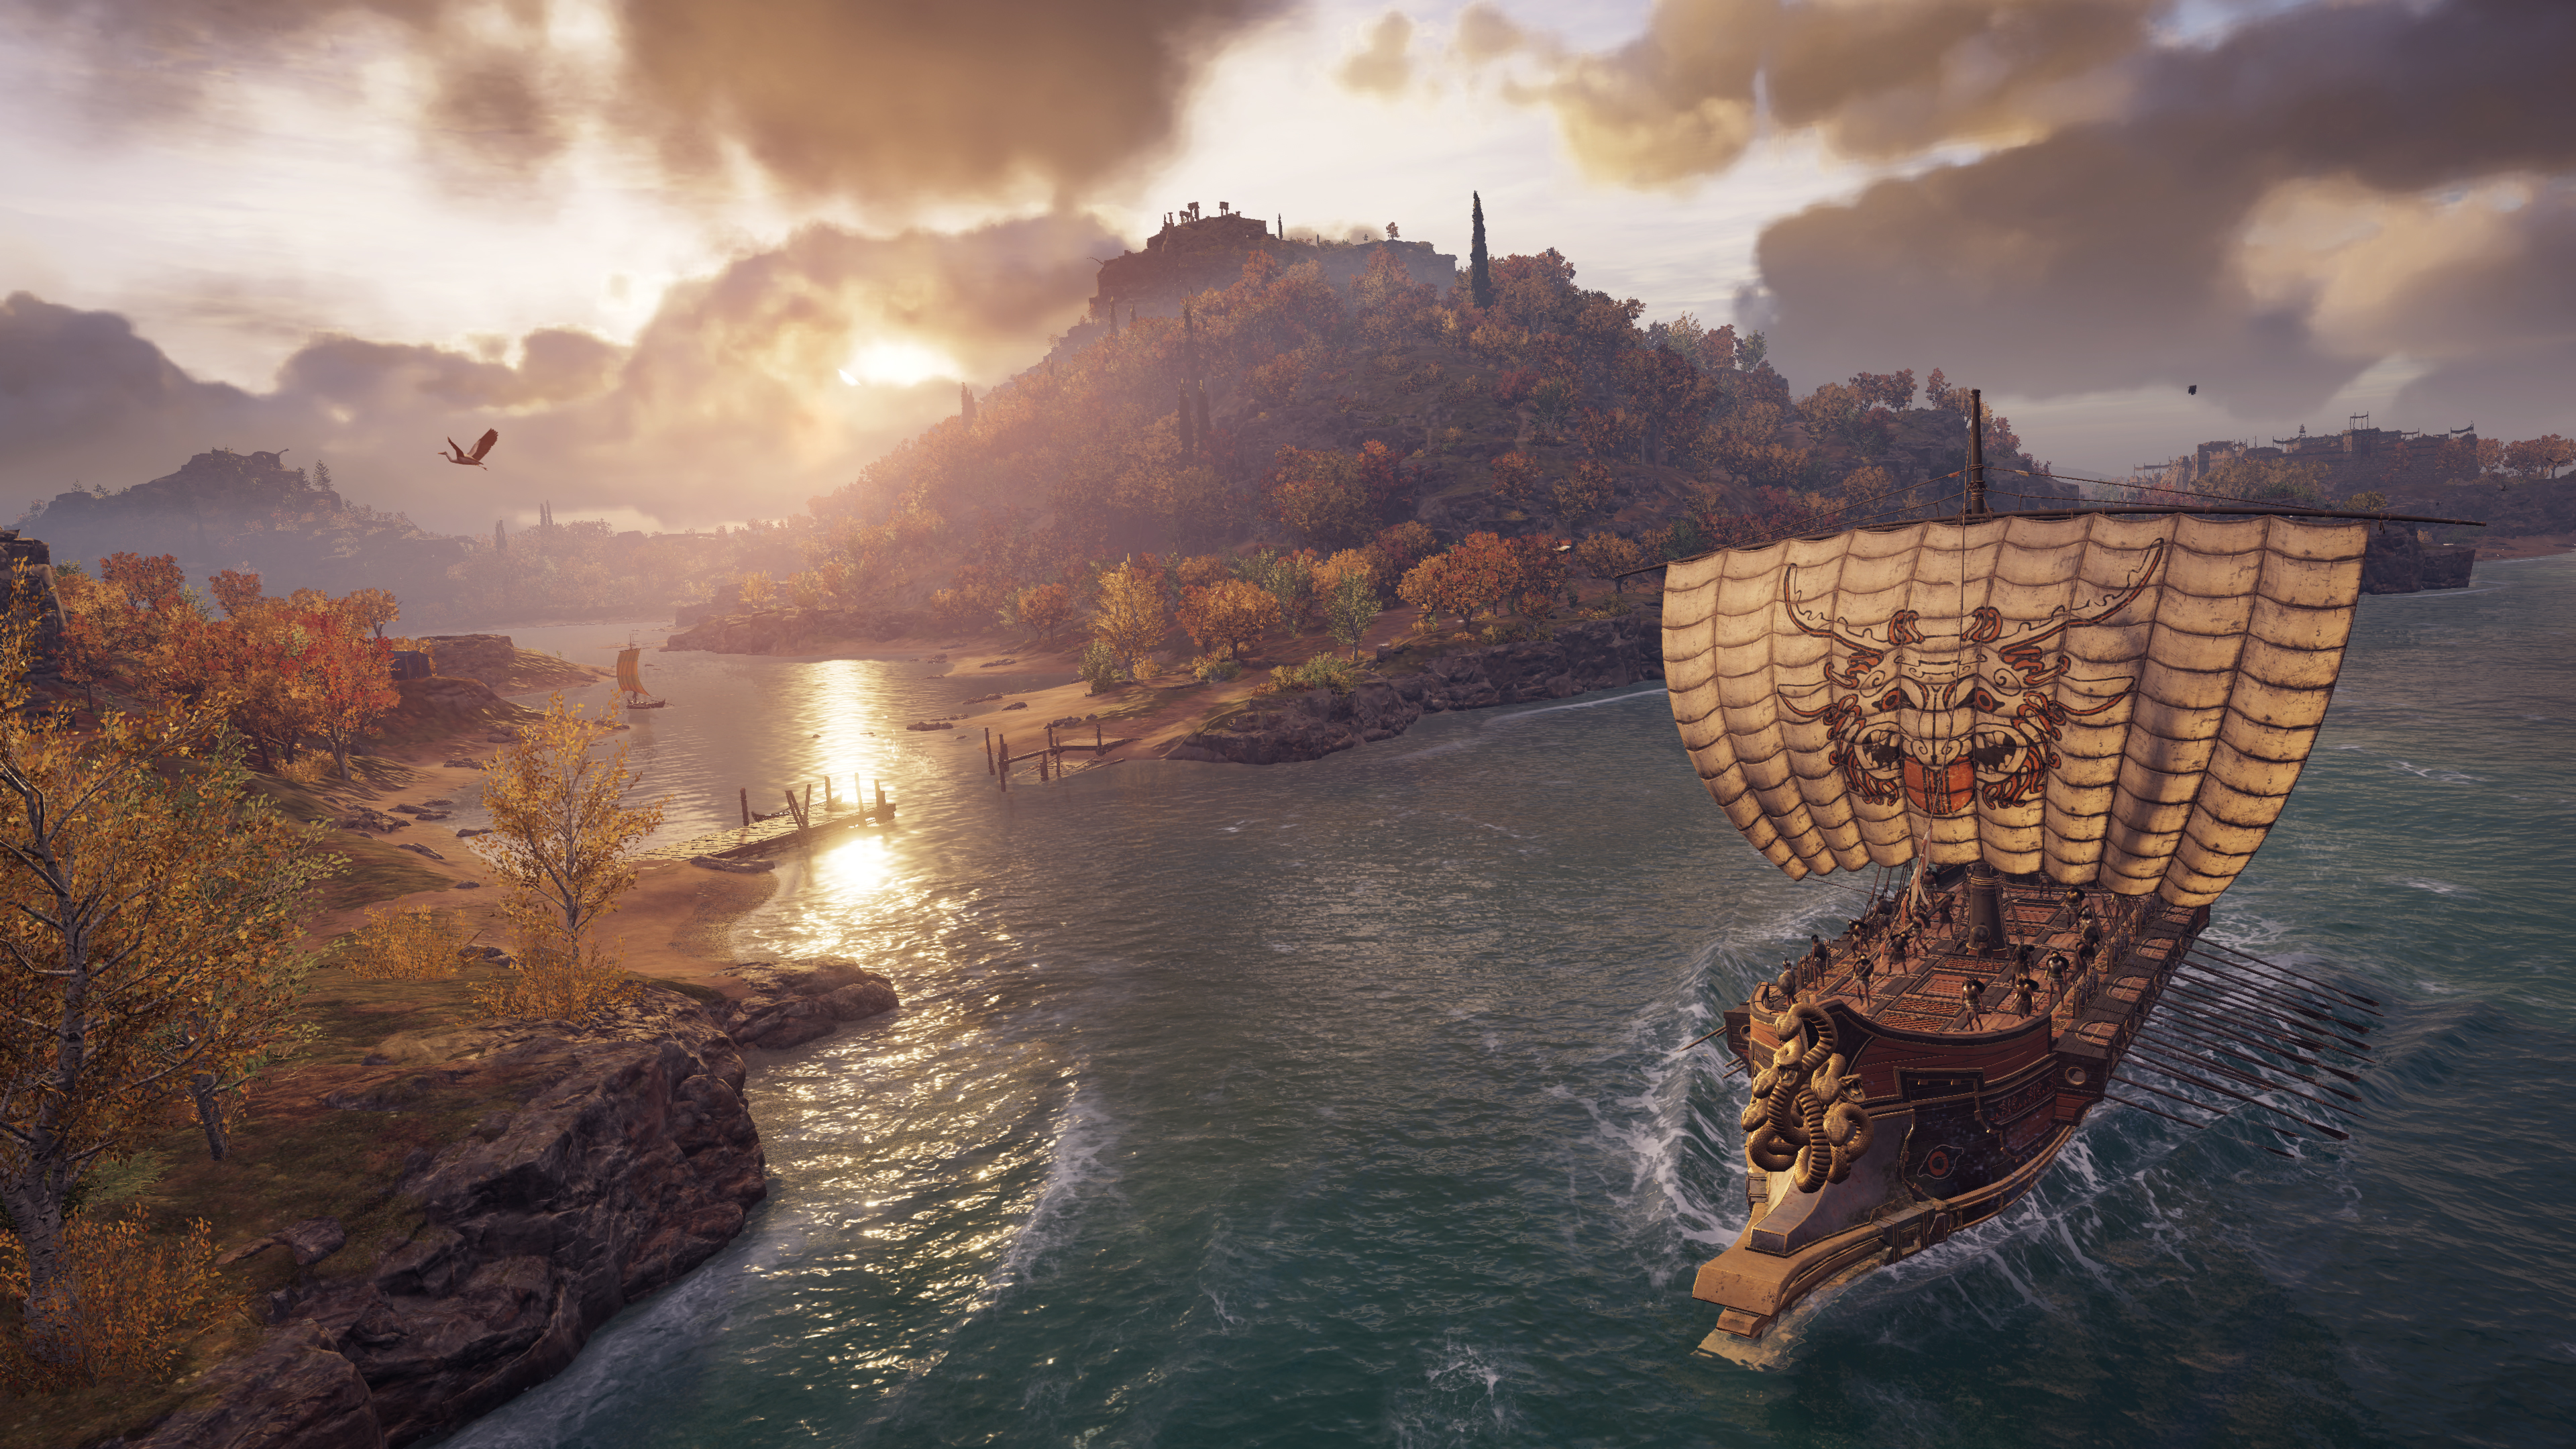 Assassin's Creed Odyssey: Thermopylae